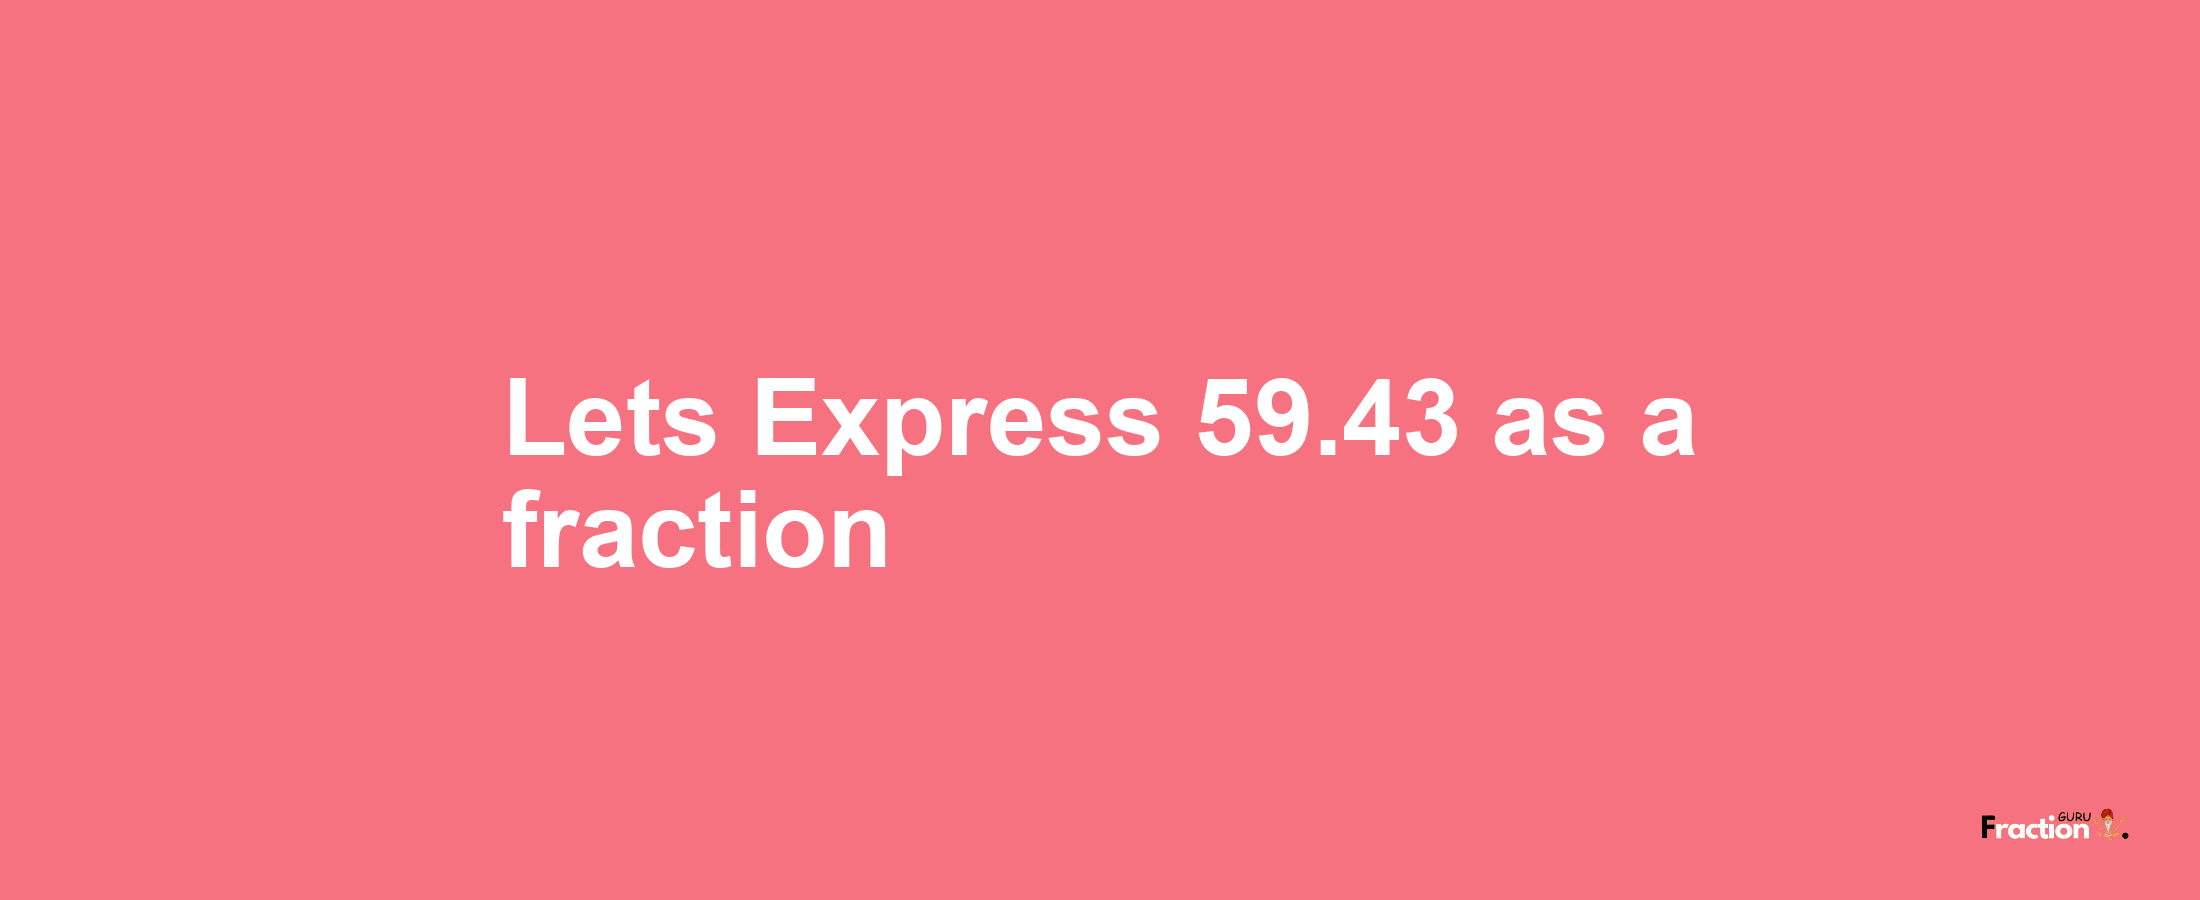 Lets Express 59.43 as afraction